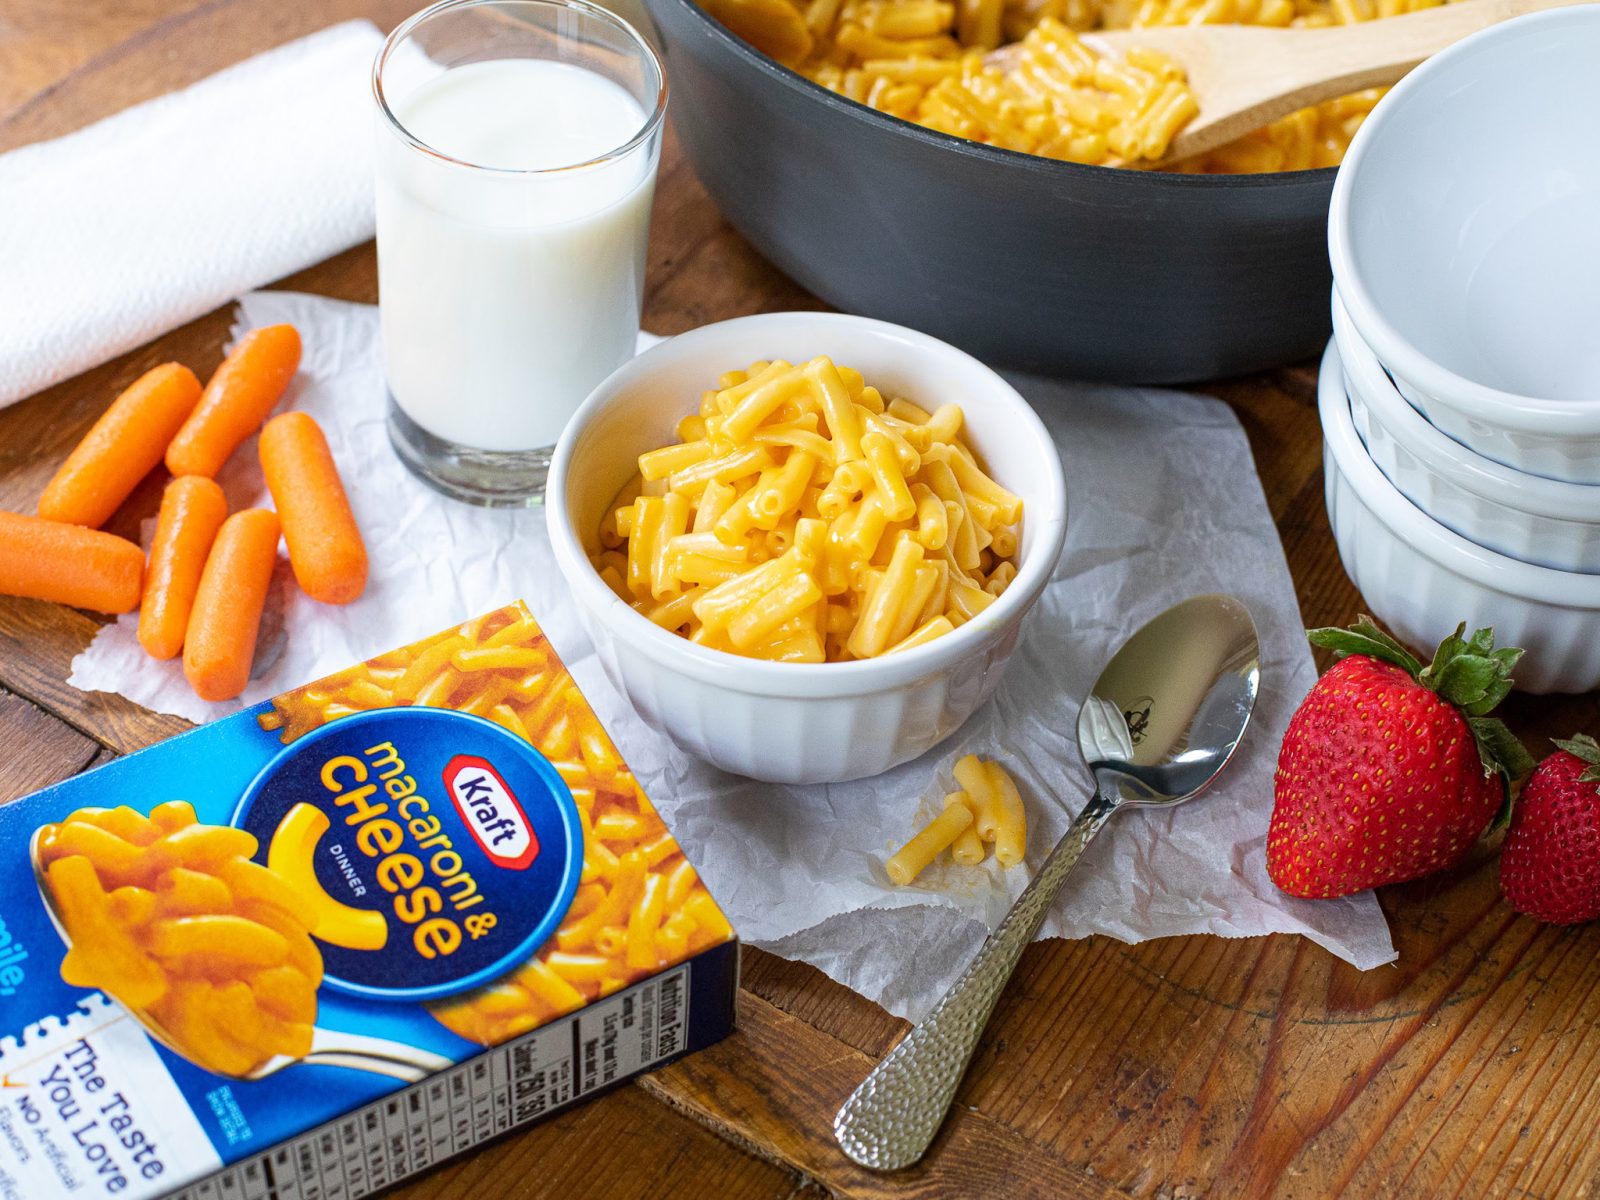 Kraft Macaroni And Cheese As Low As 74¢ At Kroger